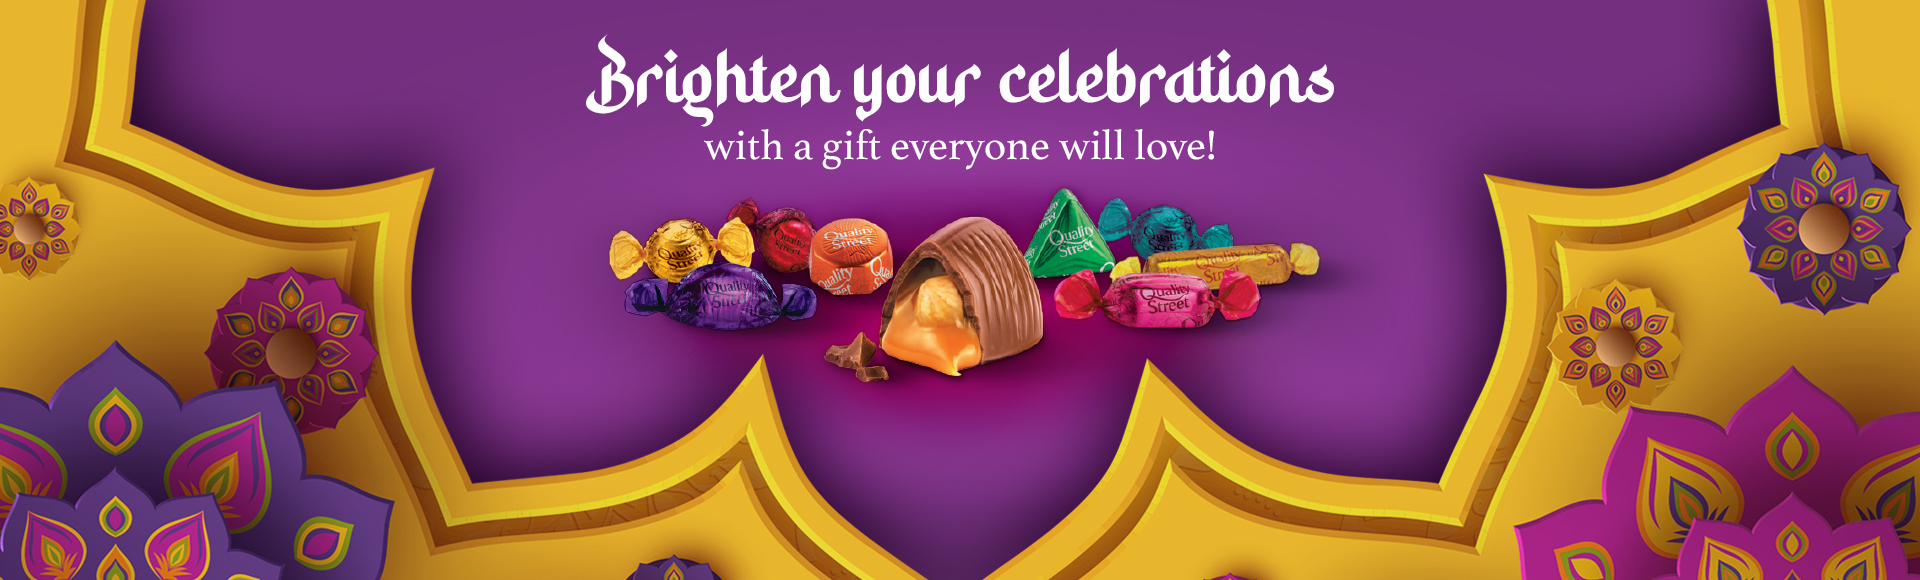 Brighten your Celebrations with Quality Street